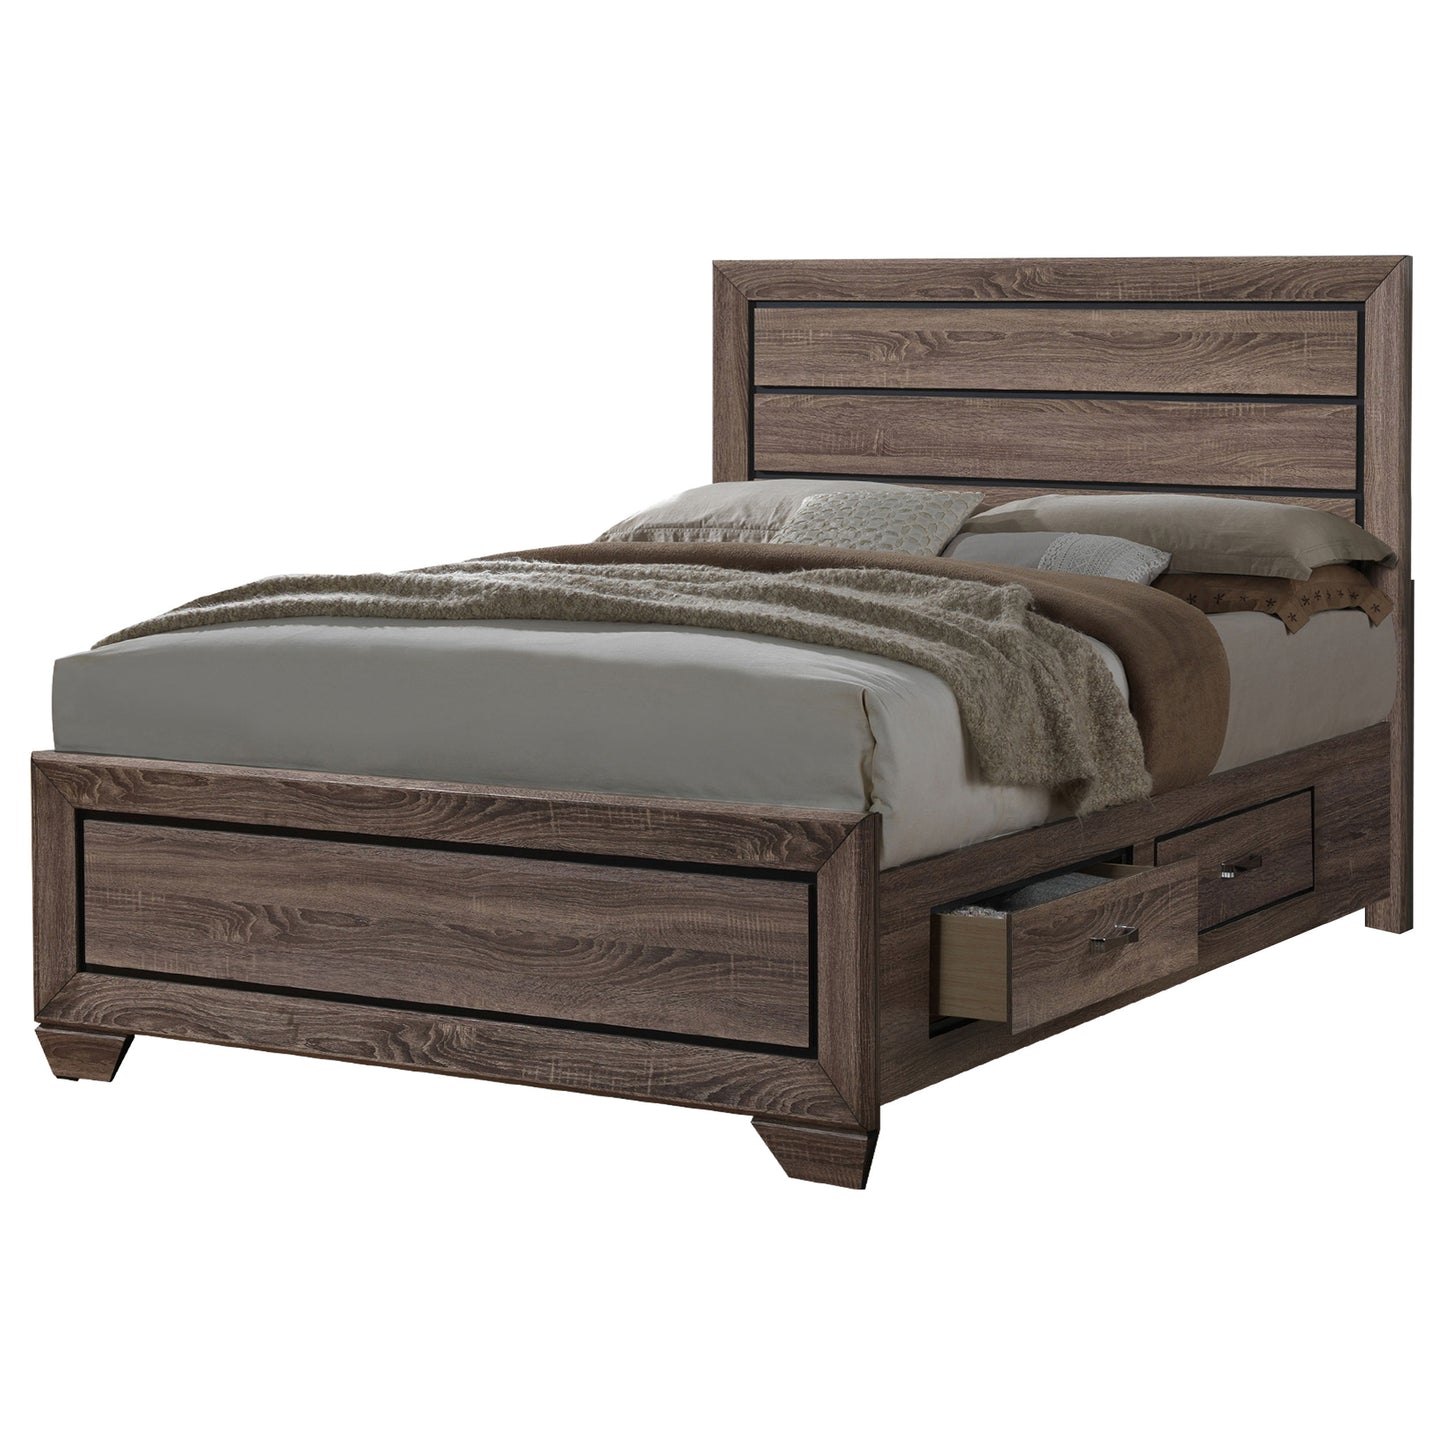 Kauffman 4-piece Eastern King Bedroom Set Washed Taupe